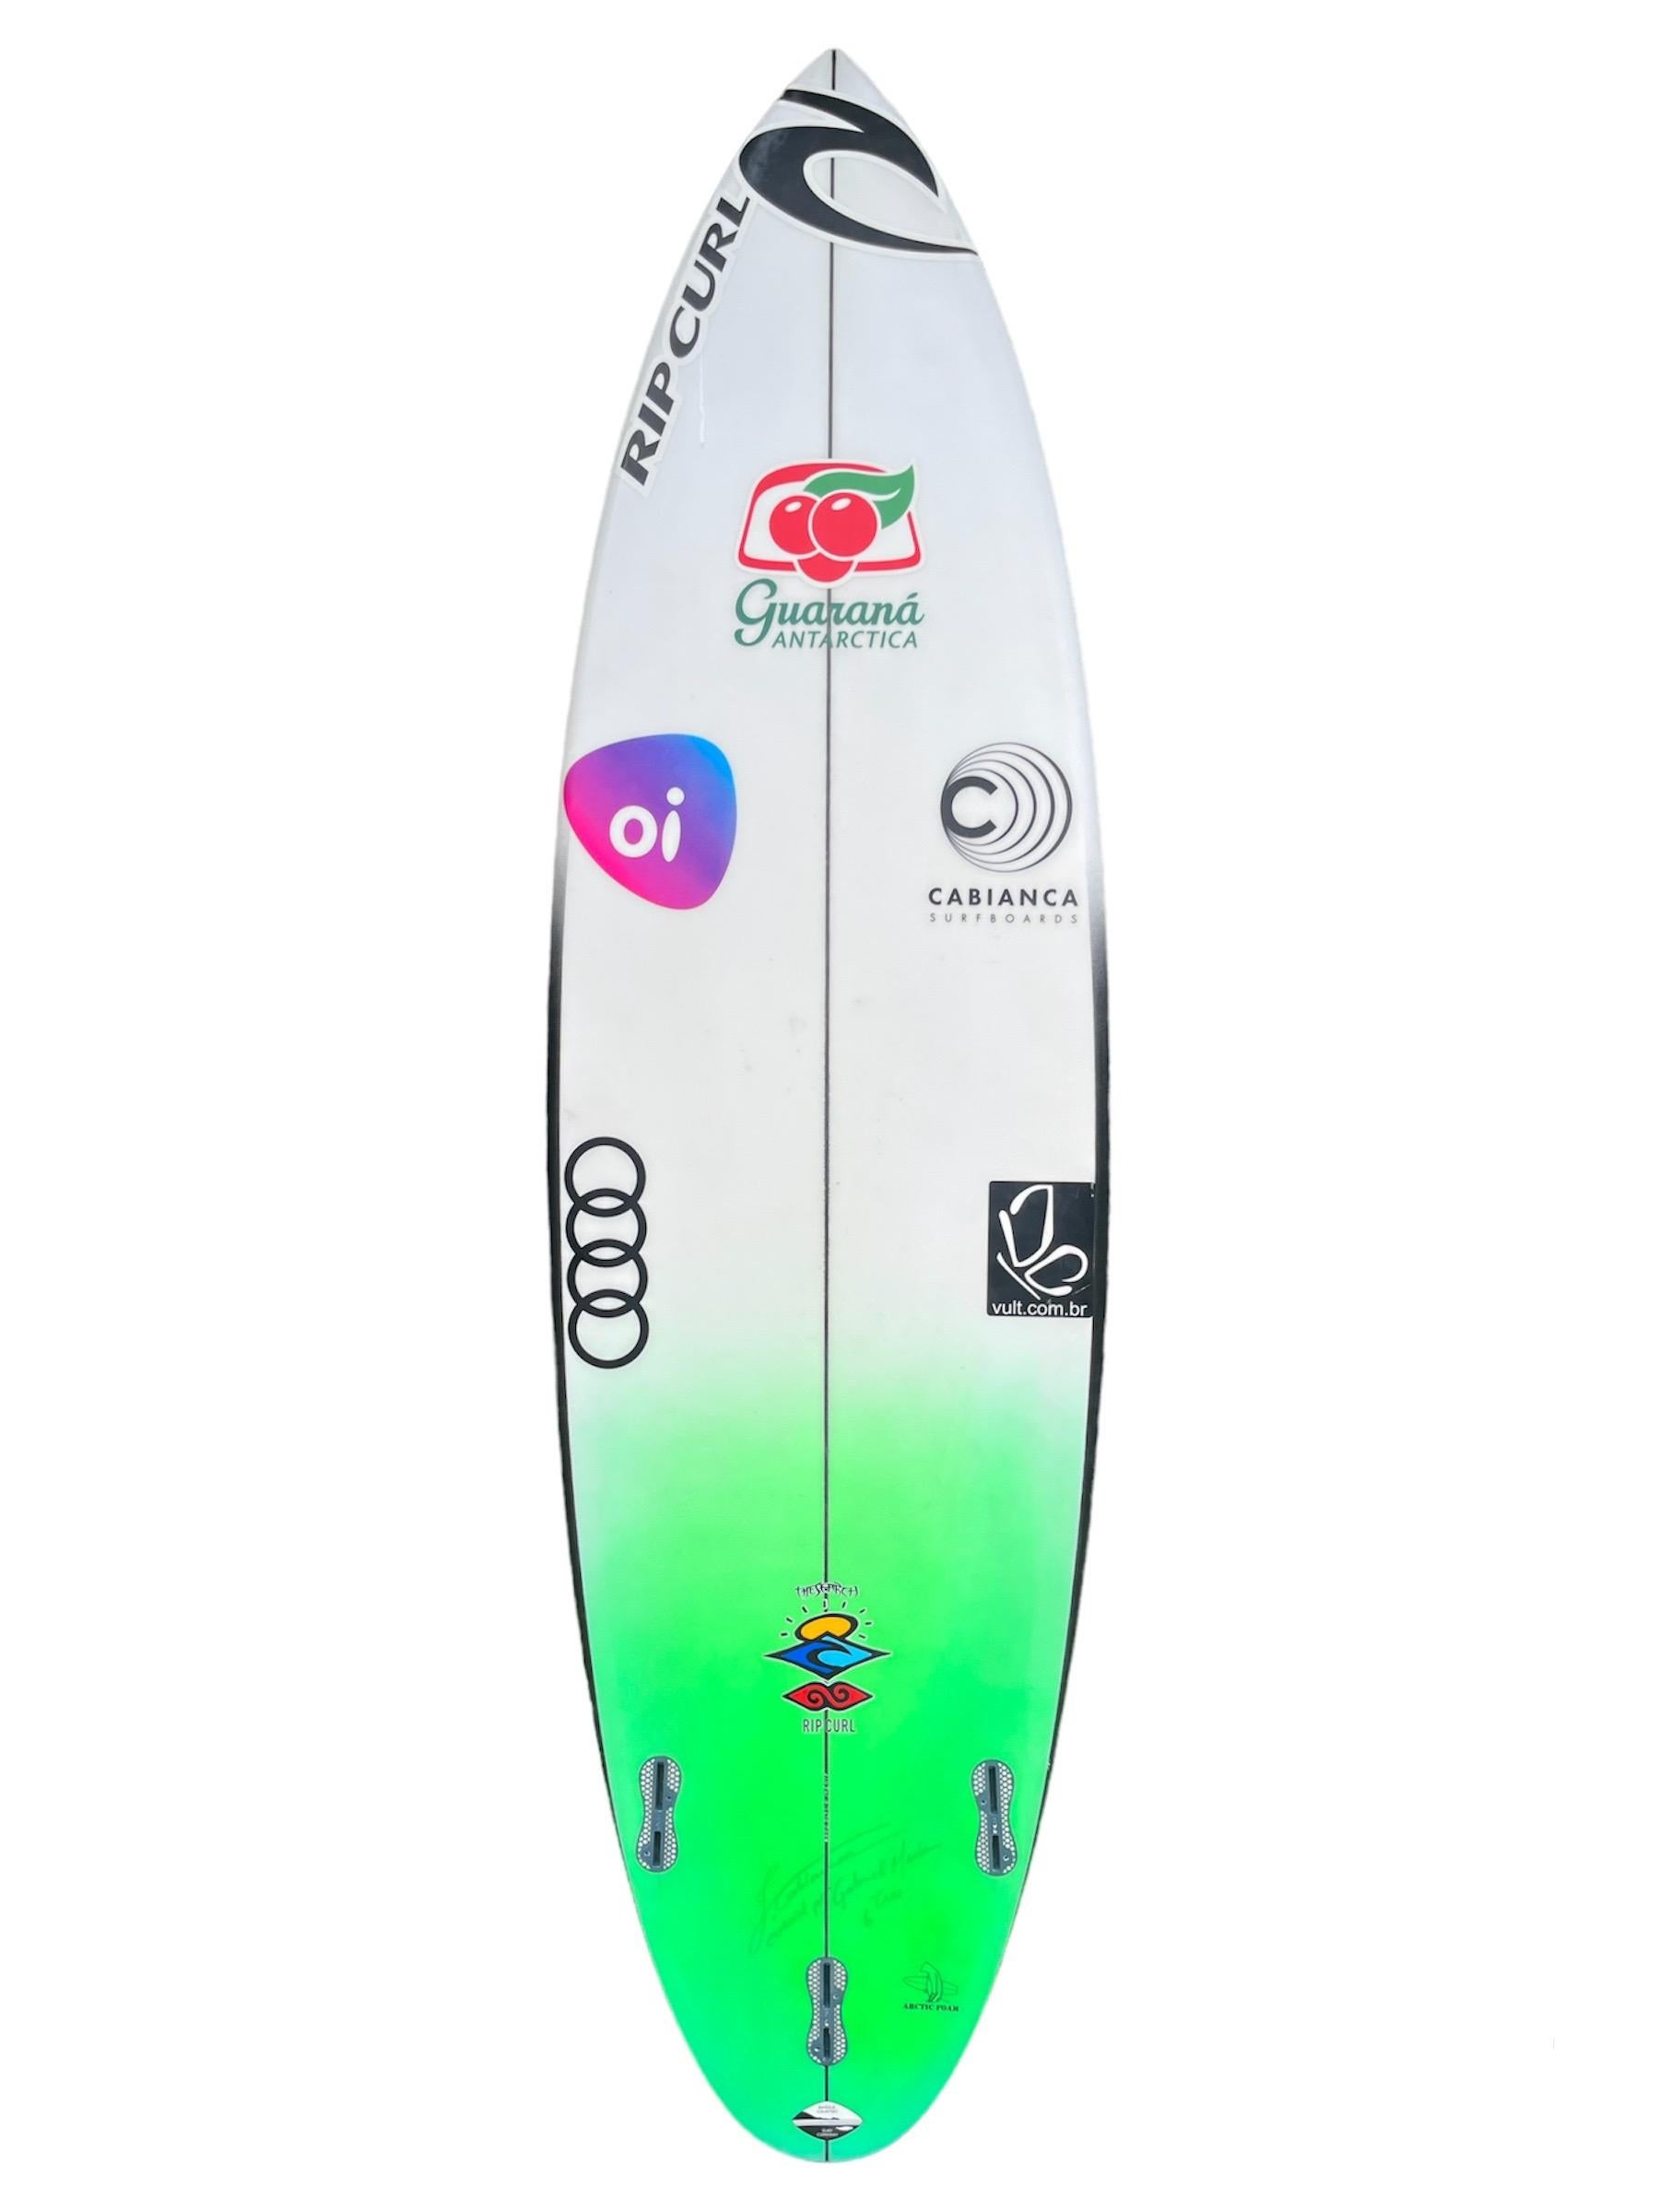 3X Surfing World Champion Gabriel Medina’s personal surfboard. Shaped for the 2020 Summer Olympics held in Tokyo Japan, July 2021. Gabriel Medina is a 3-time WSL World Champion of Surfing holding world titles in 2014, 2018, and 2021. Medina also